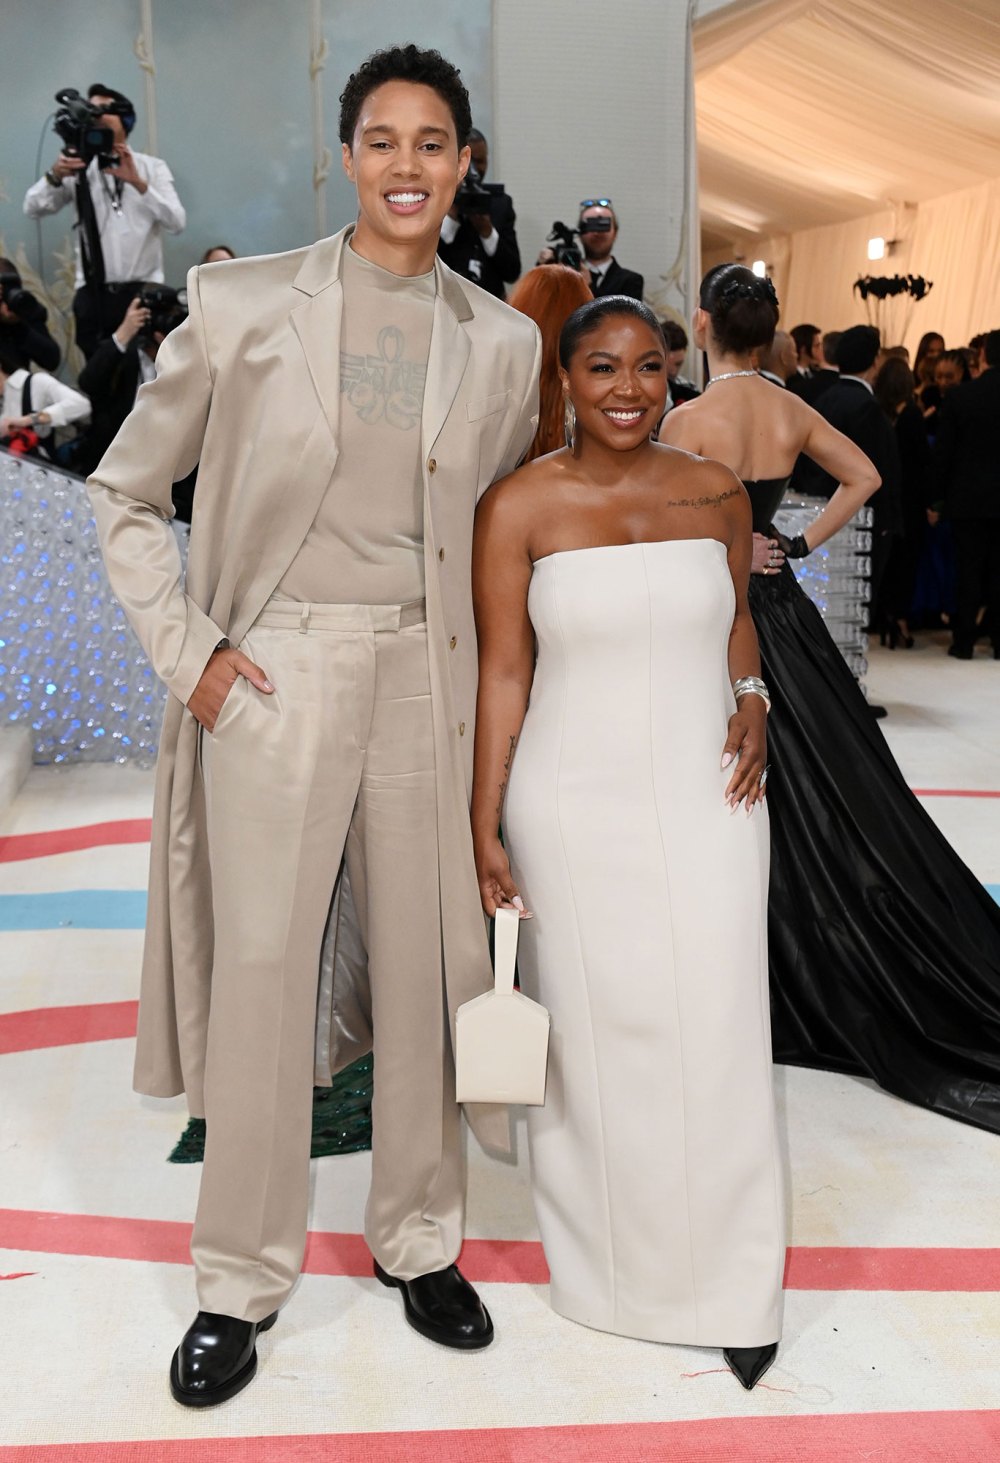 Brittney Griner and Wife Cherelle Griner Shine in Custom Calvin Klein at the Met Gala: Photos